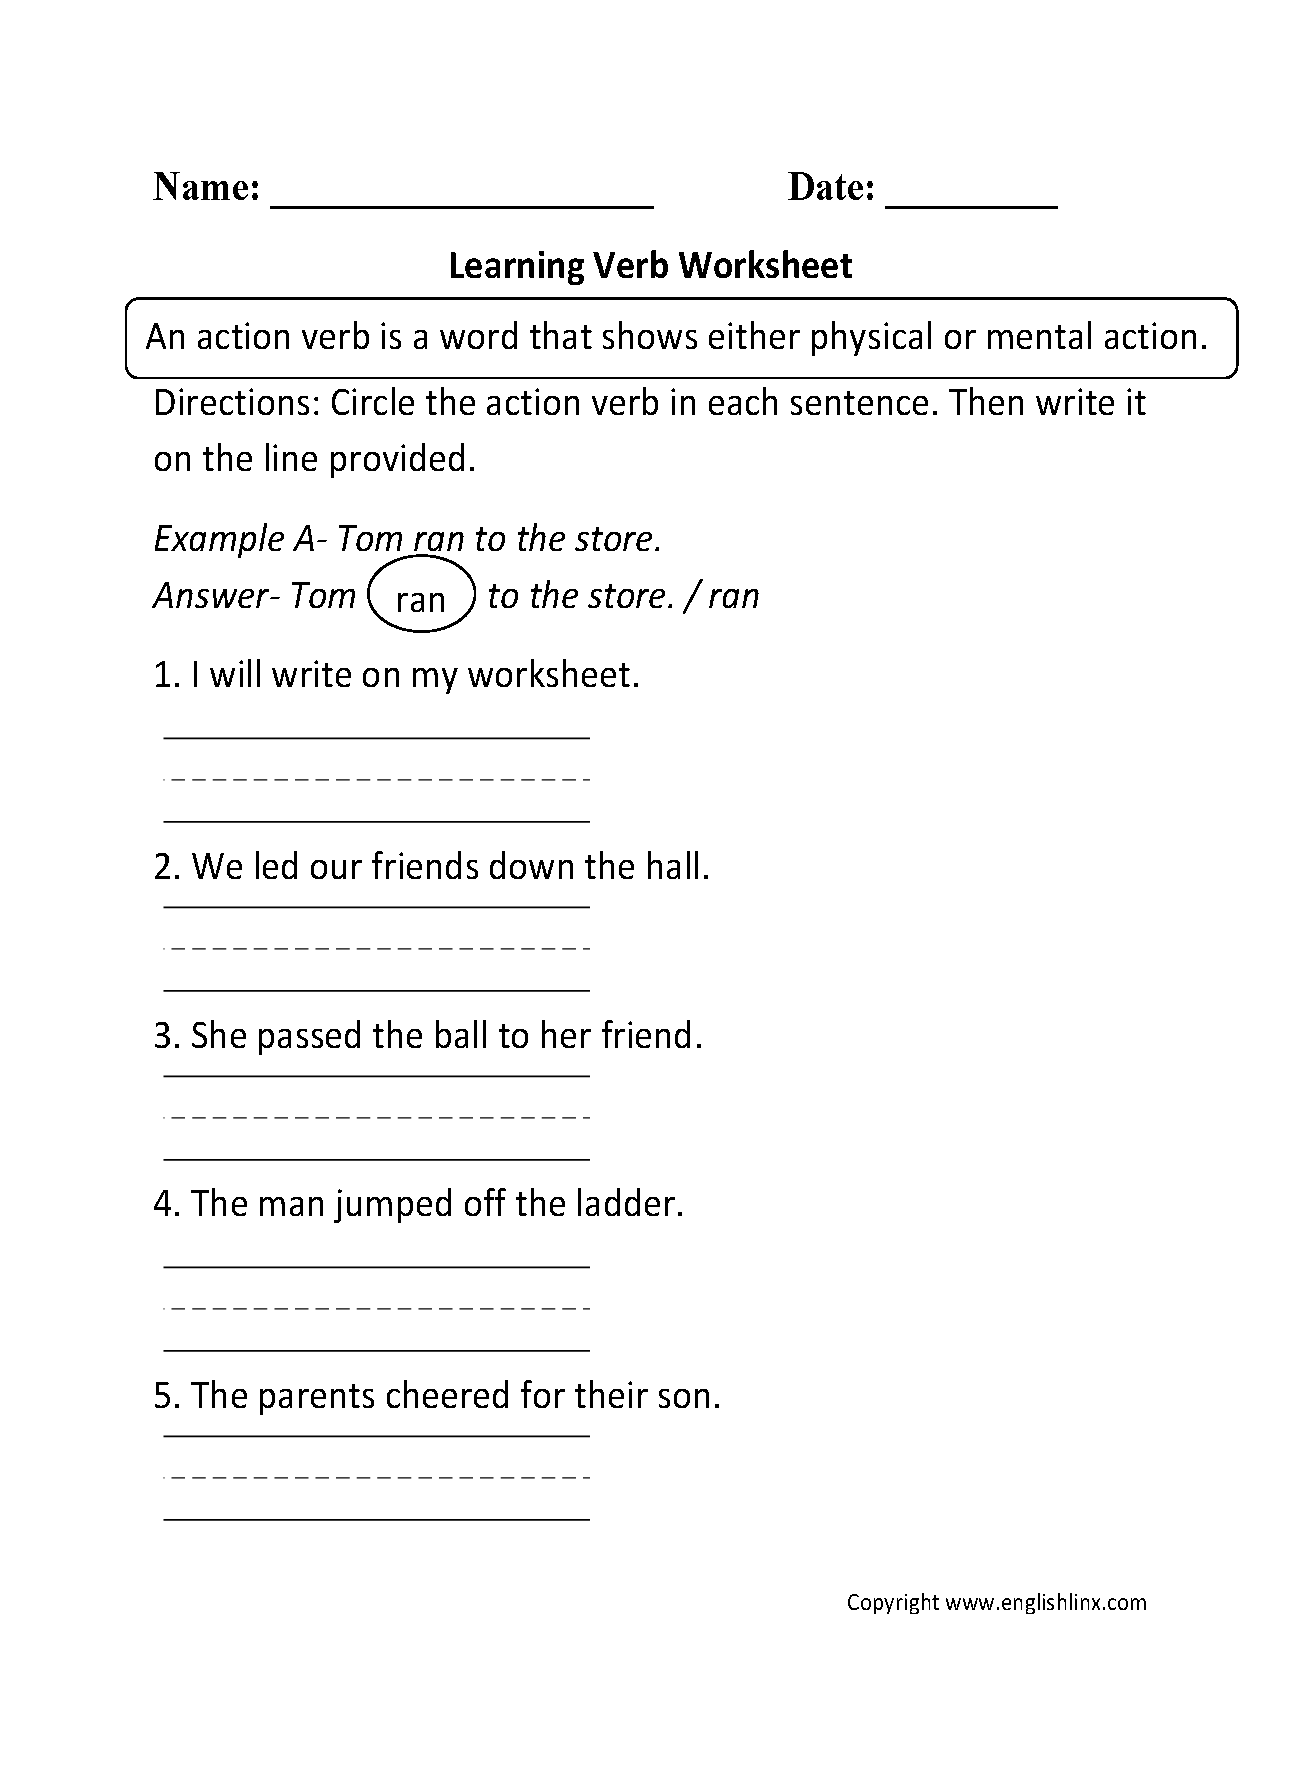 17 Best Images Of Action Verb Worksheets 2nd Grade Action And Linking Verbs Worksheets Verb